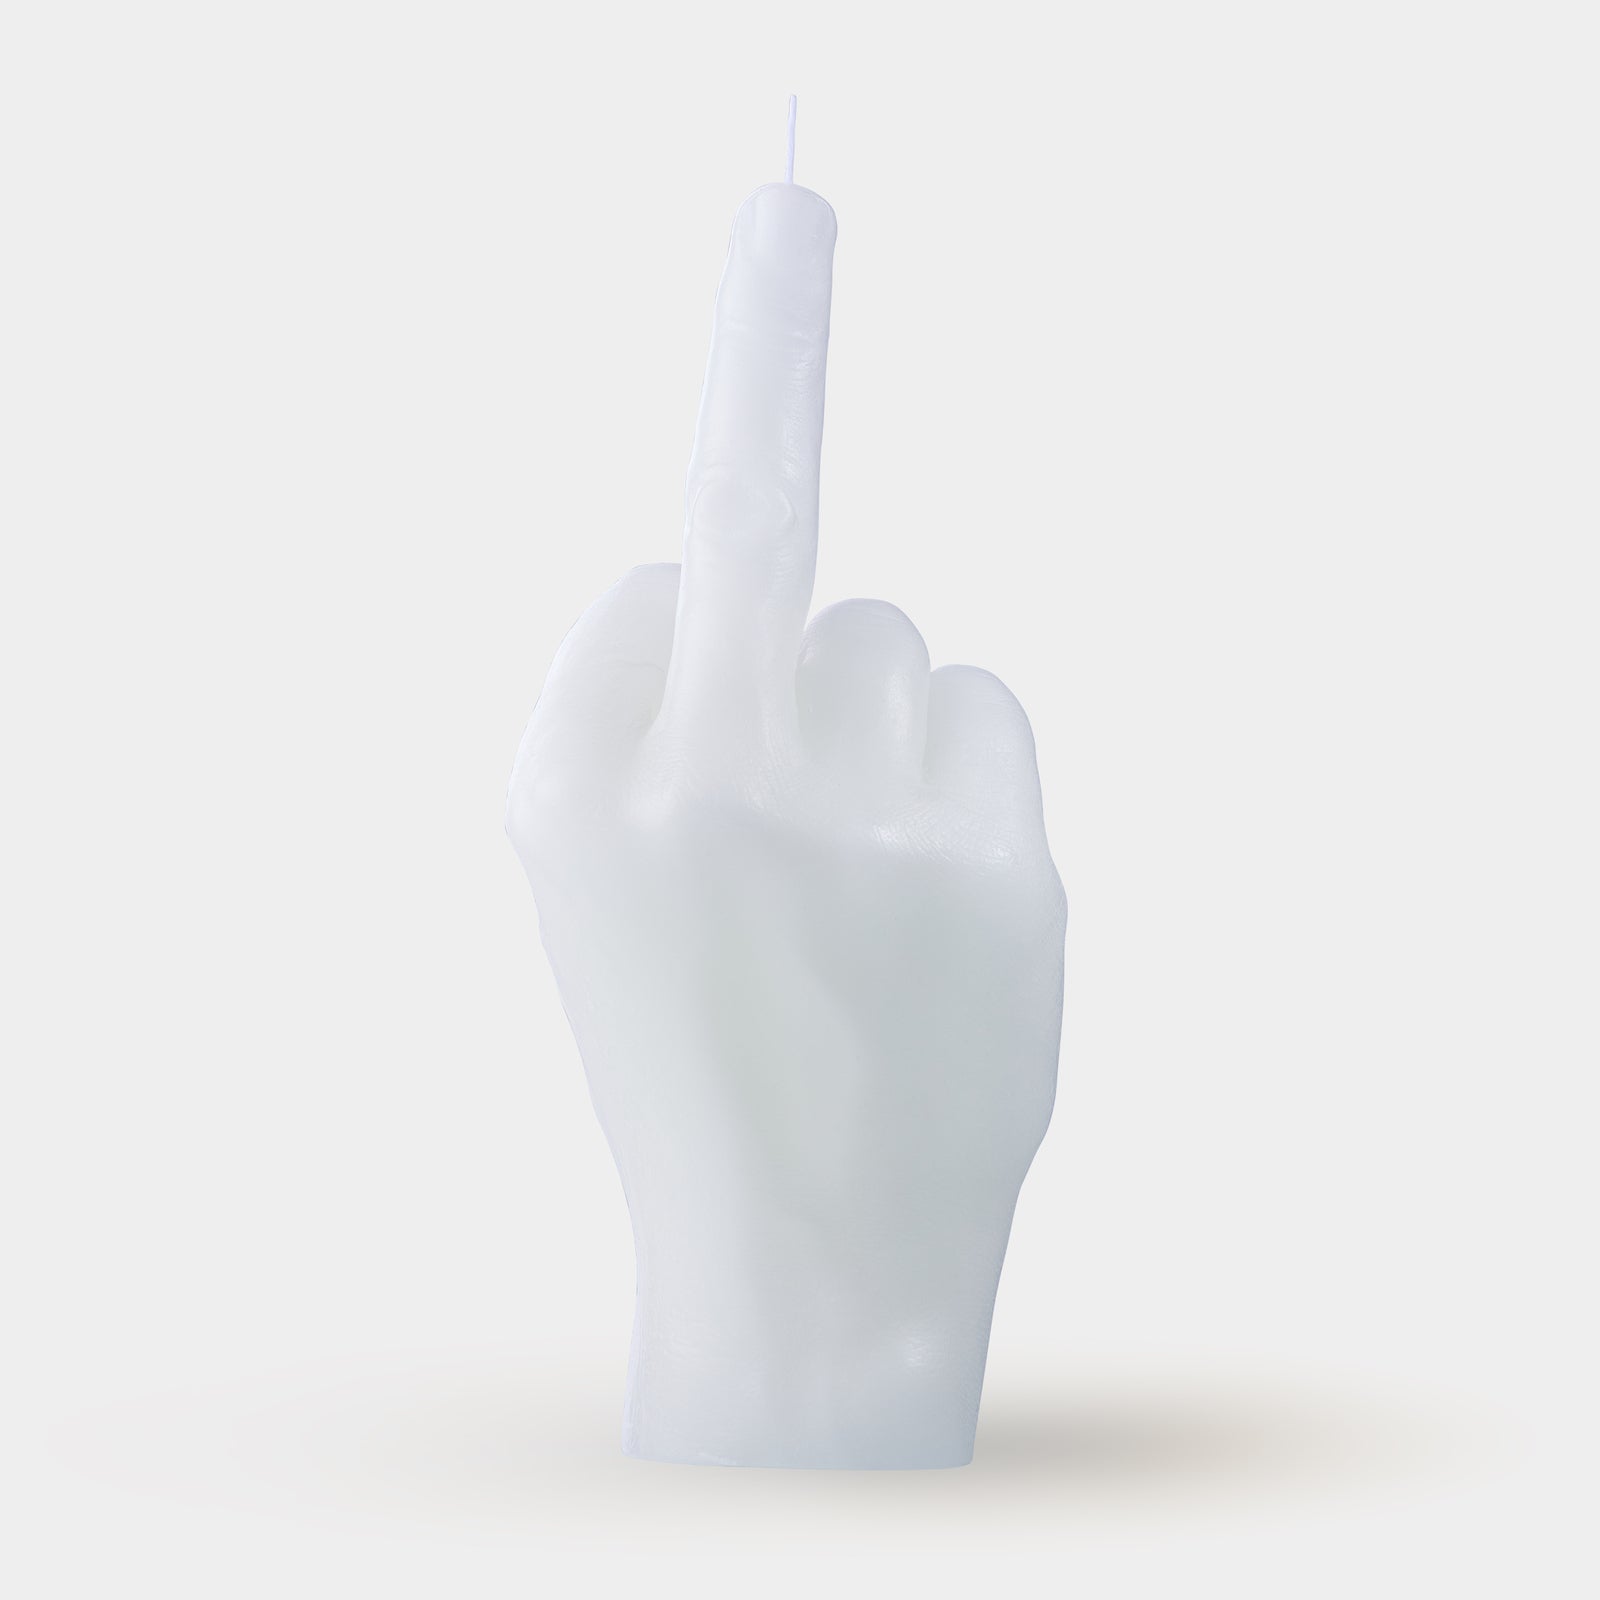 F*ck You Hand Gesture Candle | White